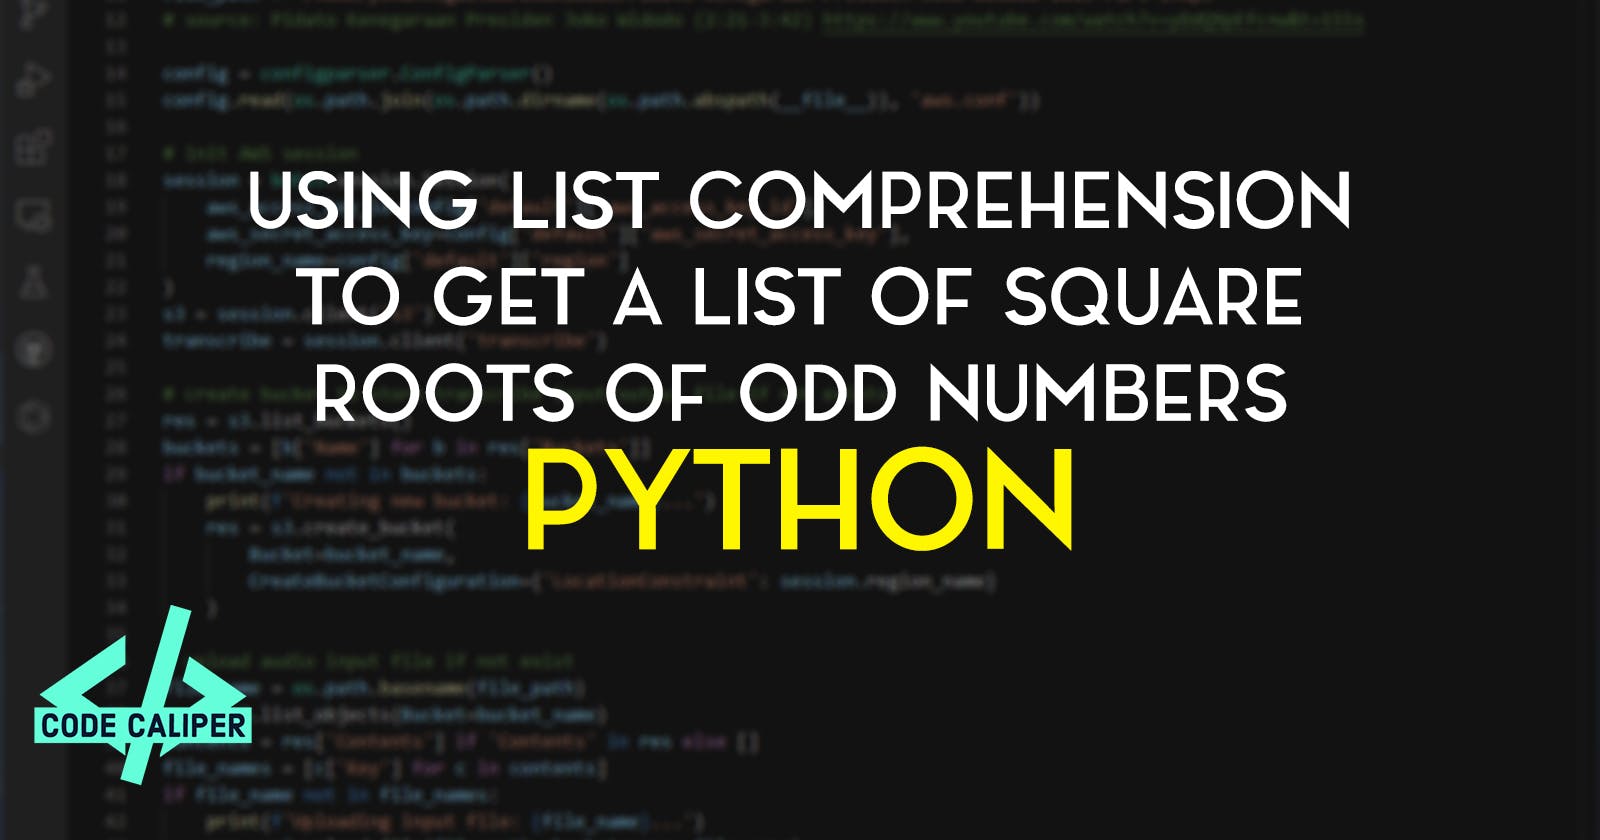 Using List Comprehension to Get a List of Square Roots of Odd Numbers in Python